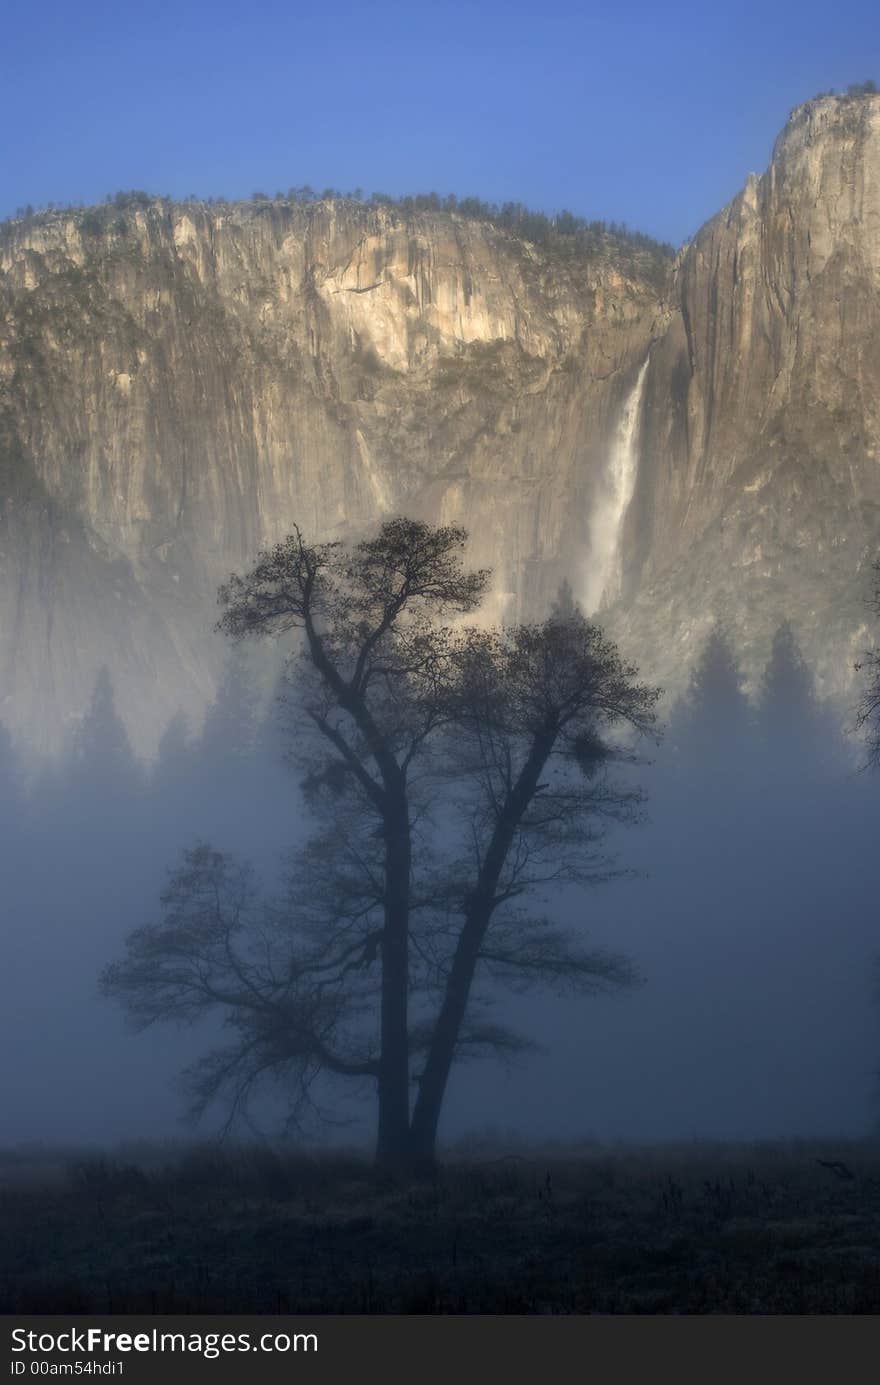 Early morning fog enveloping and oak tree in Yosemite National Park, stoneman meadow. Yosemite Falls can be seen in the background. Early morning fog enveloping and oak tree in Yosemite National Park, stoneman meadow. Yosemite Falls can be seen in the background.